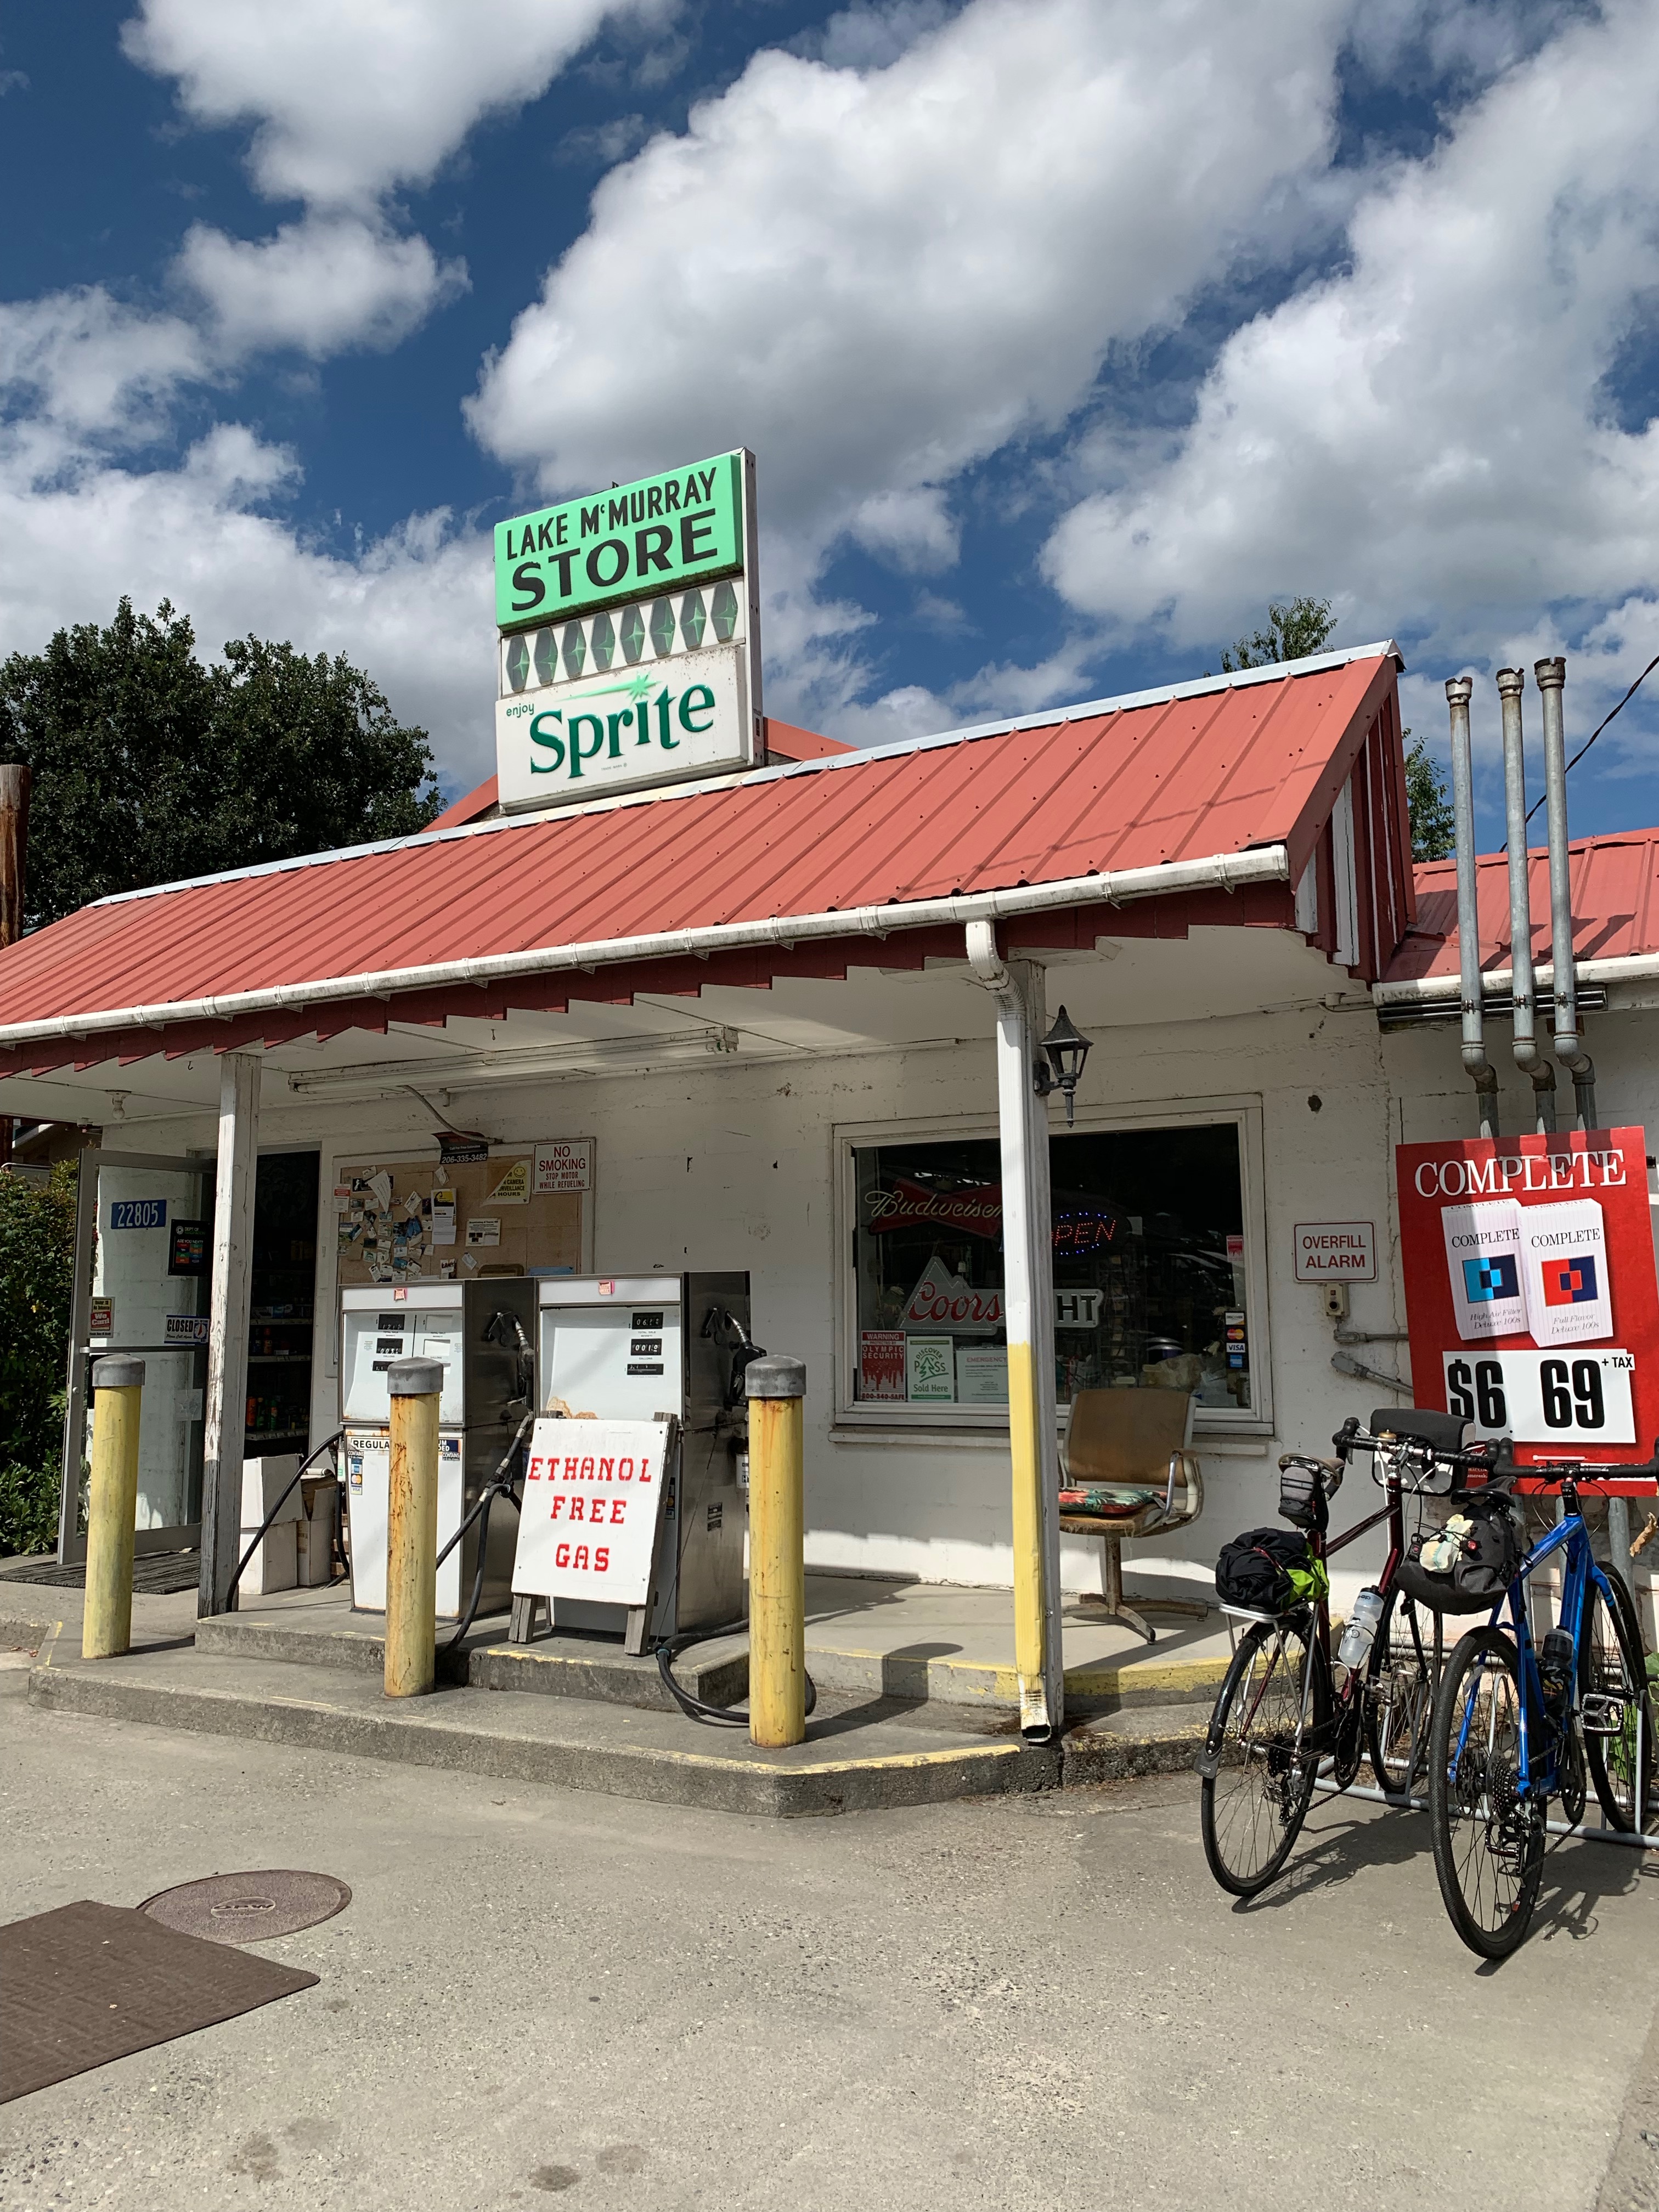 Cute old-school gas station on the way